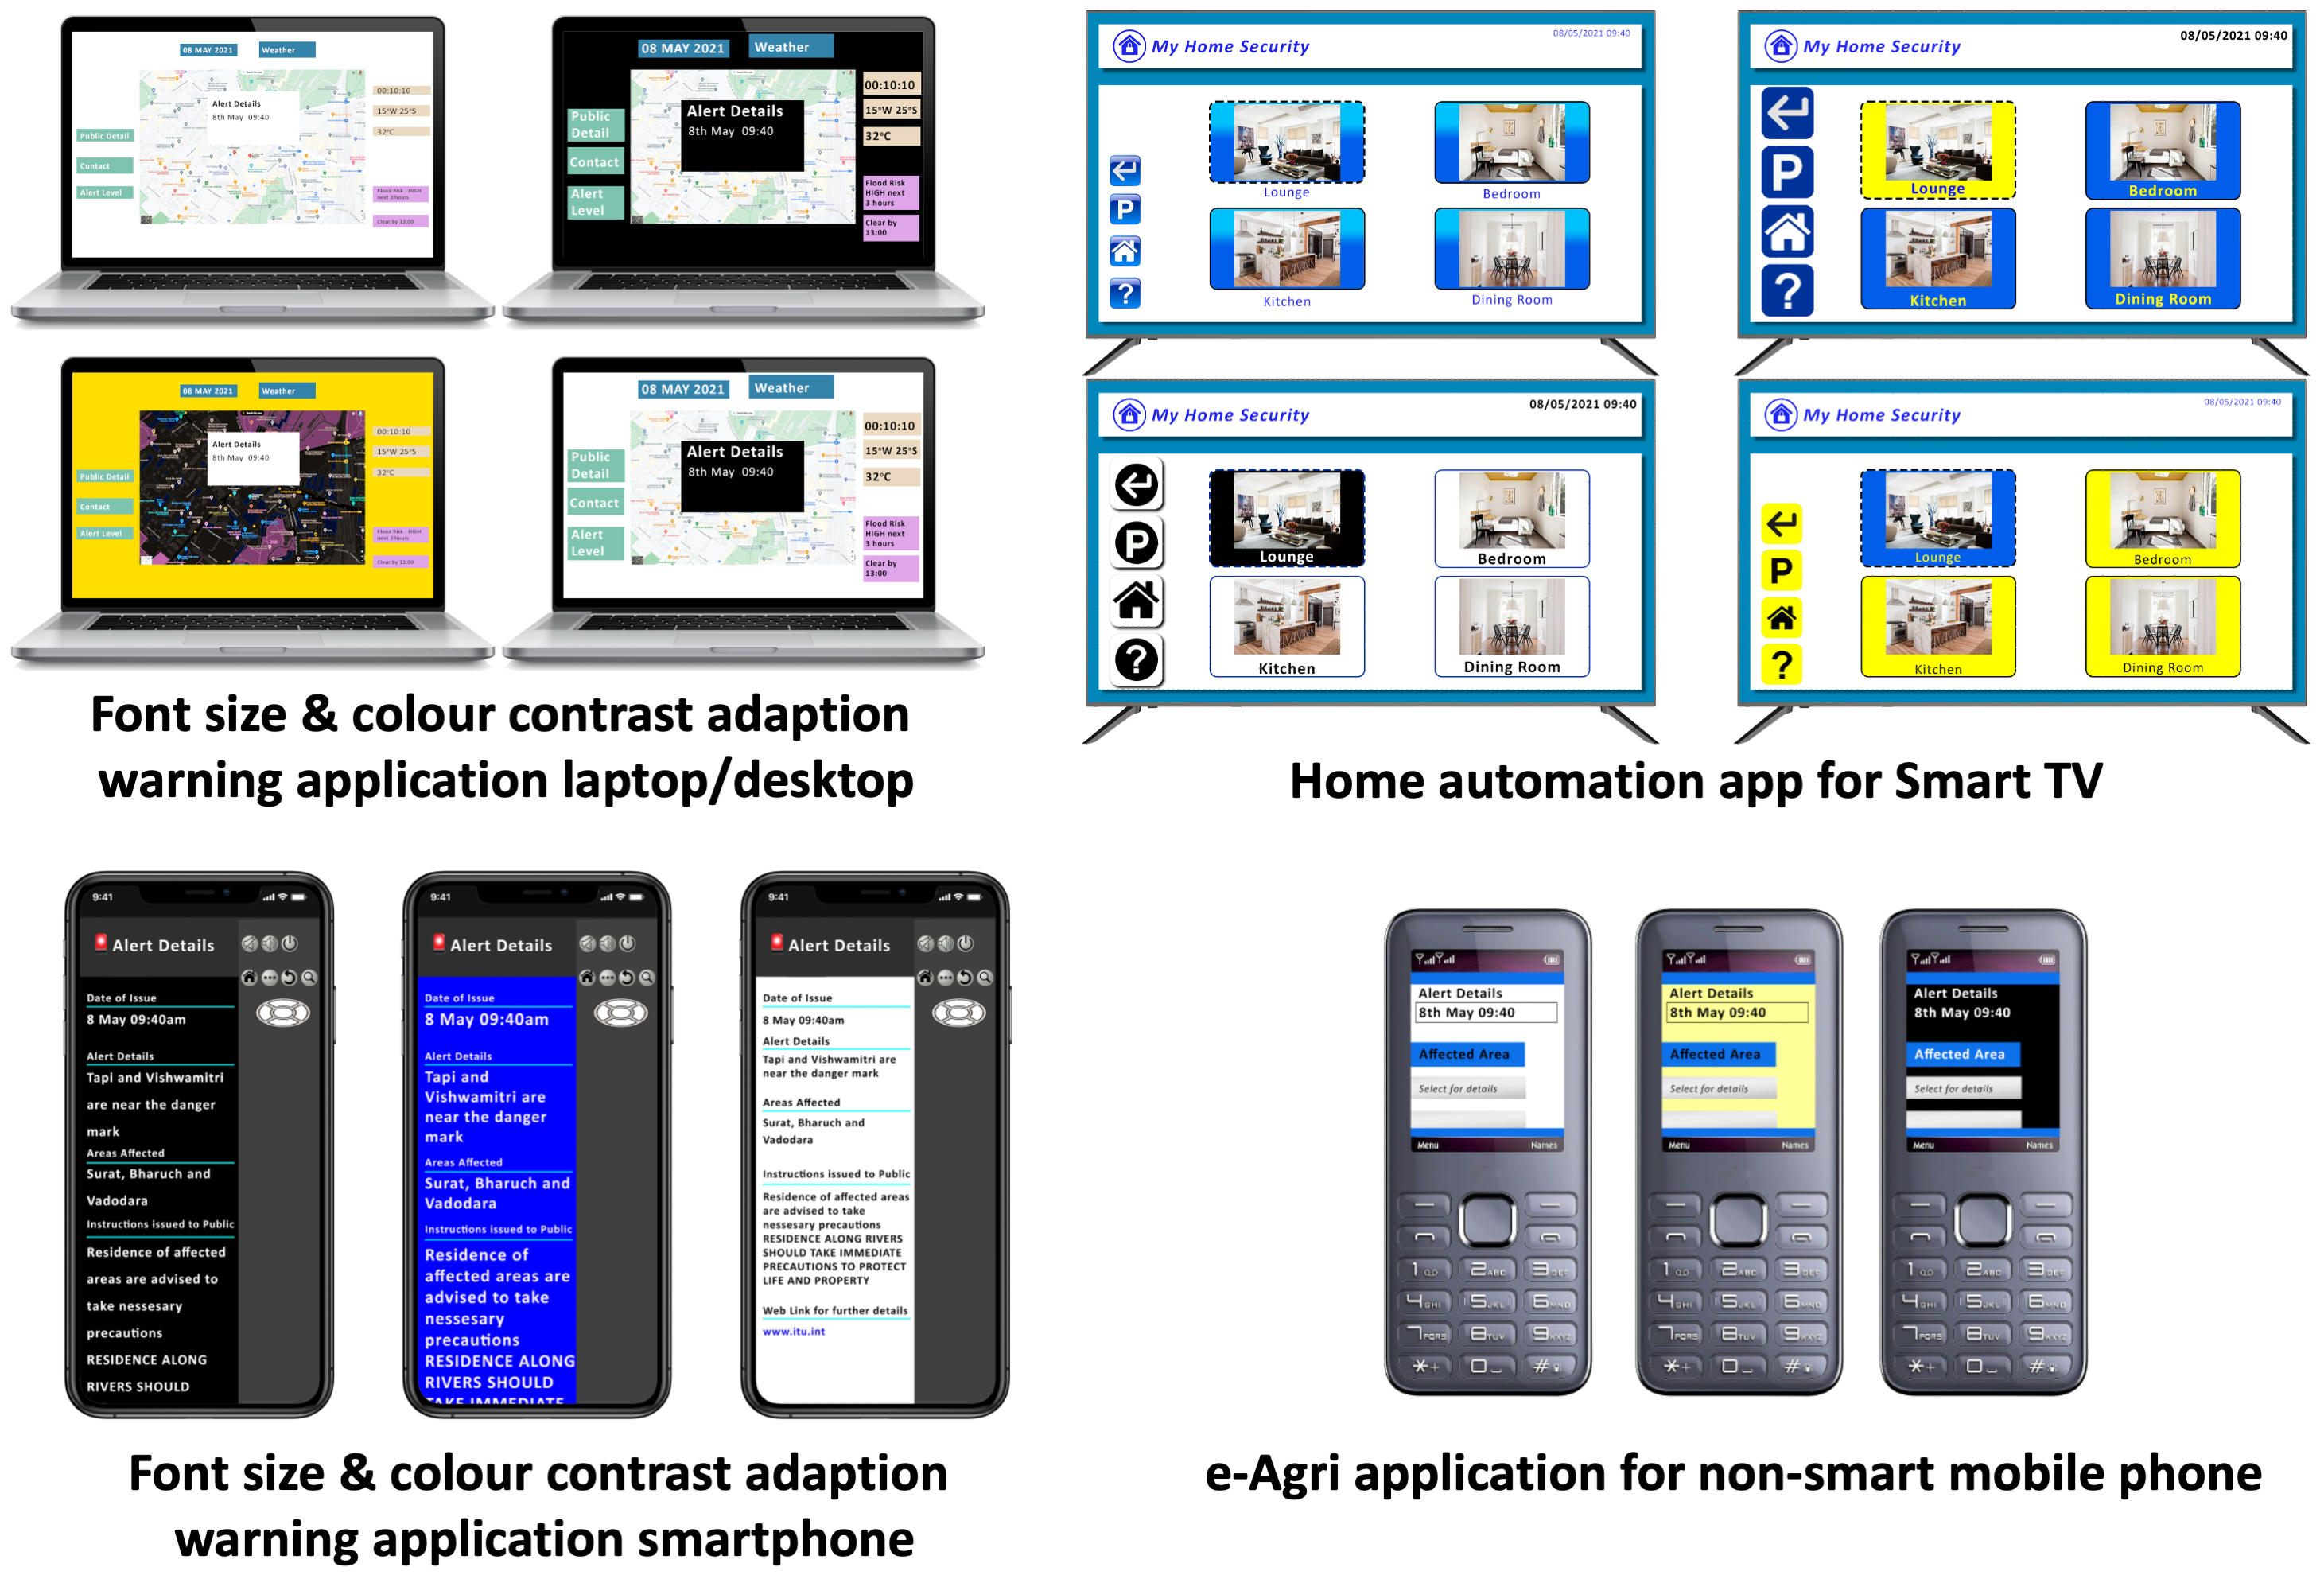 Figure 2 shows how graphics and text can be adapted and enhanced to assist visual impairment. Examples for a computer, Smart TV, Smart Phone and simple mobile phone display are shown.